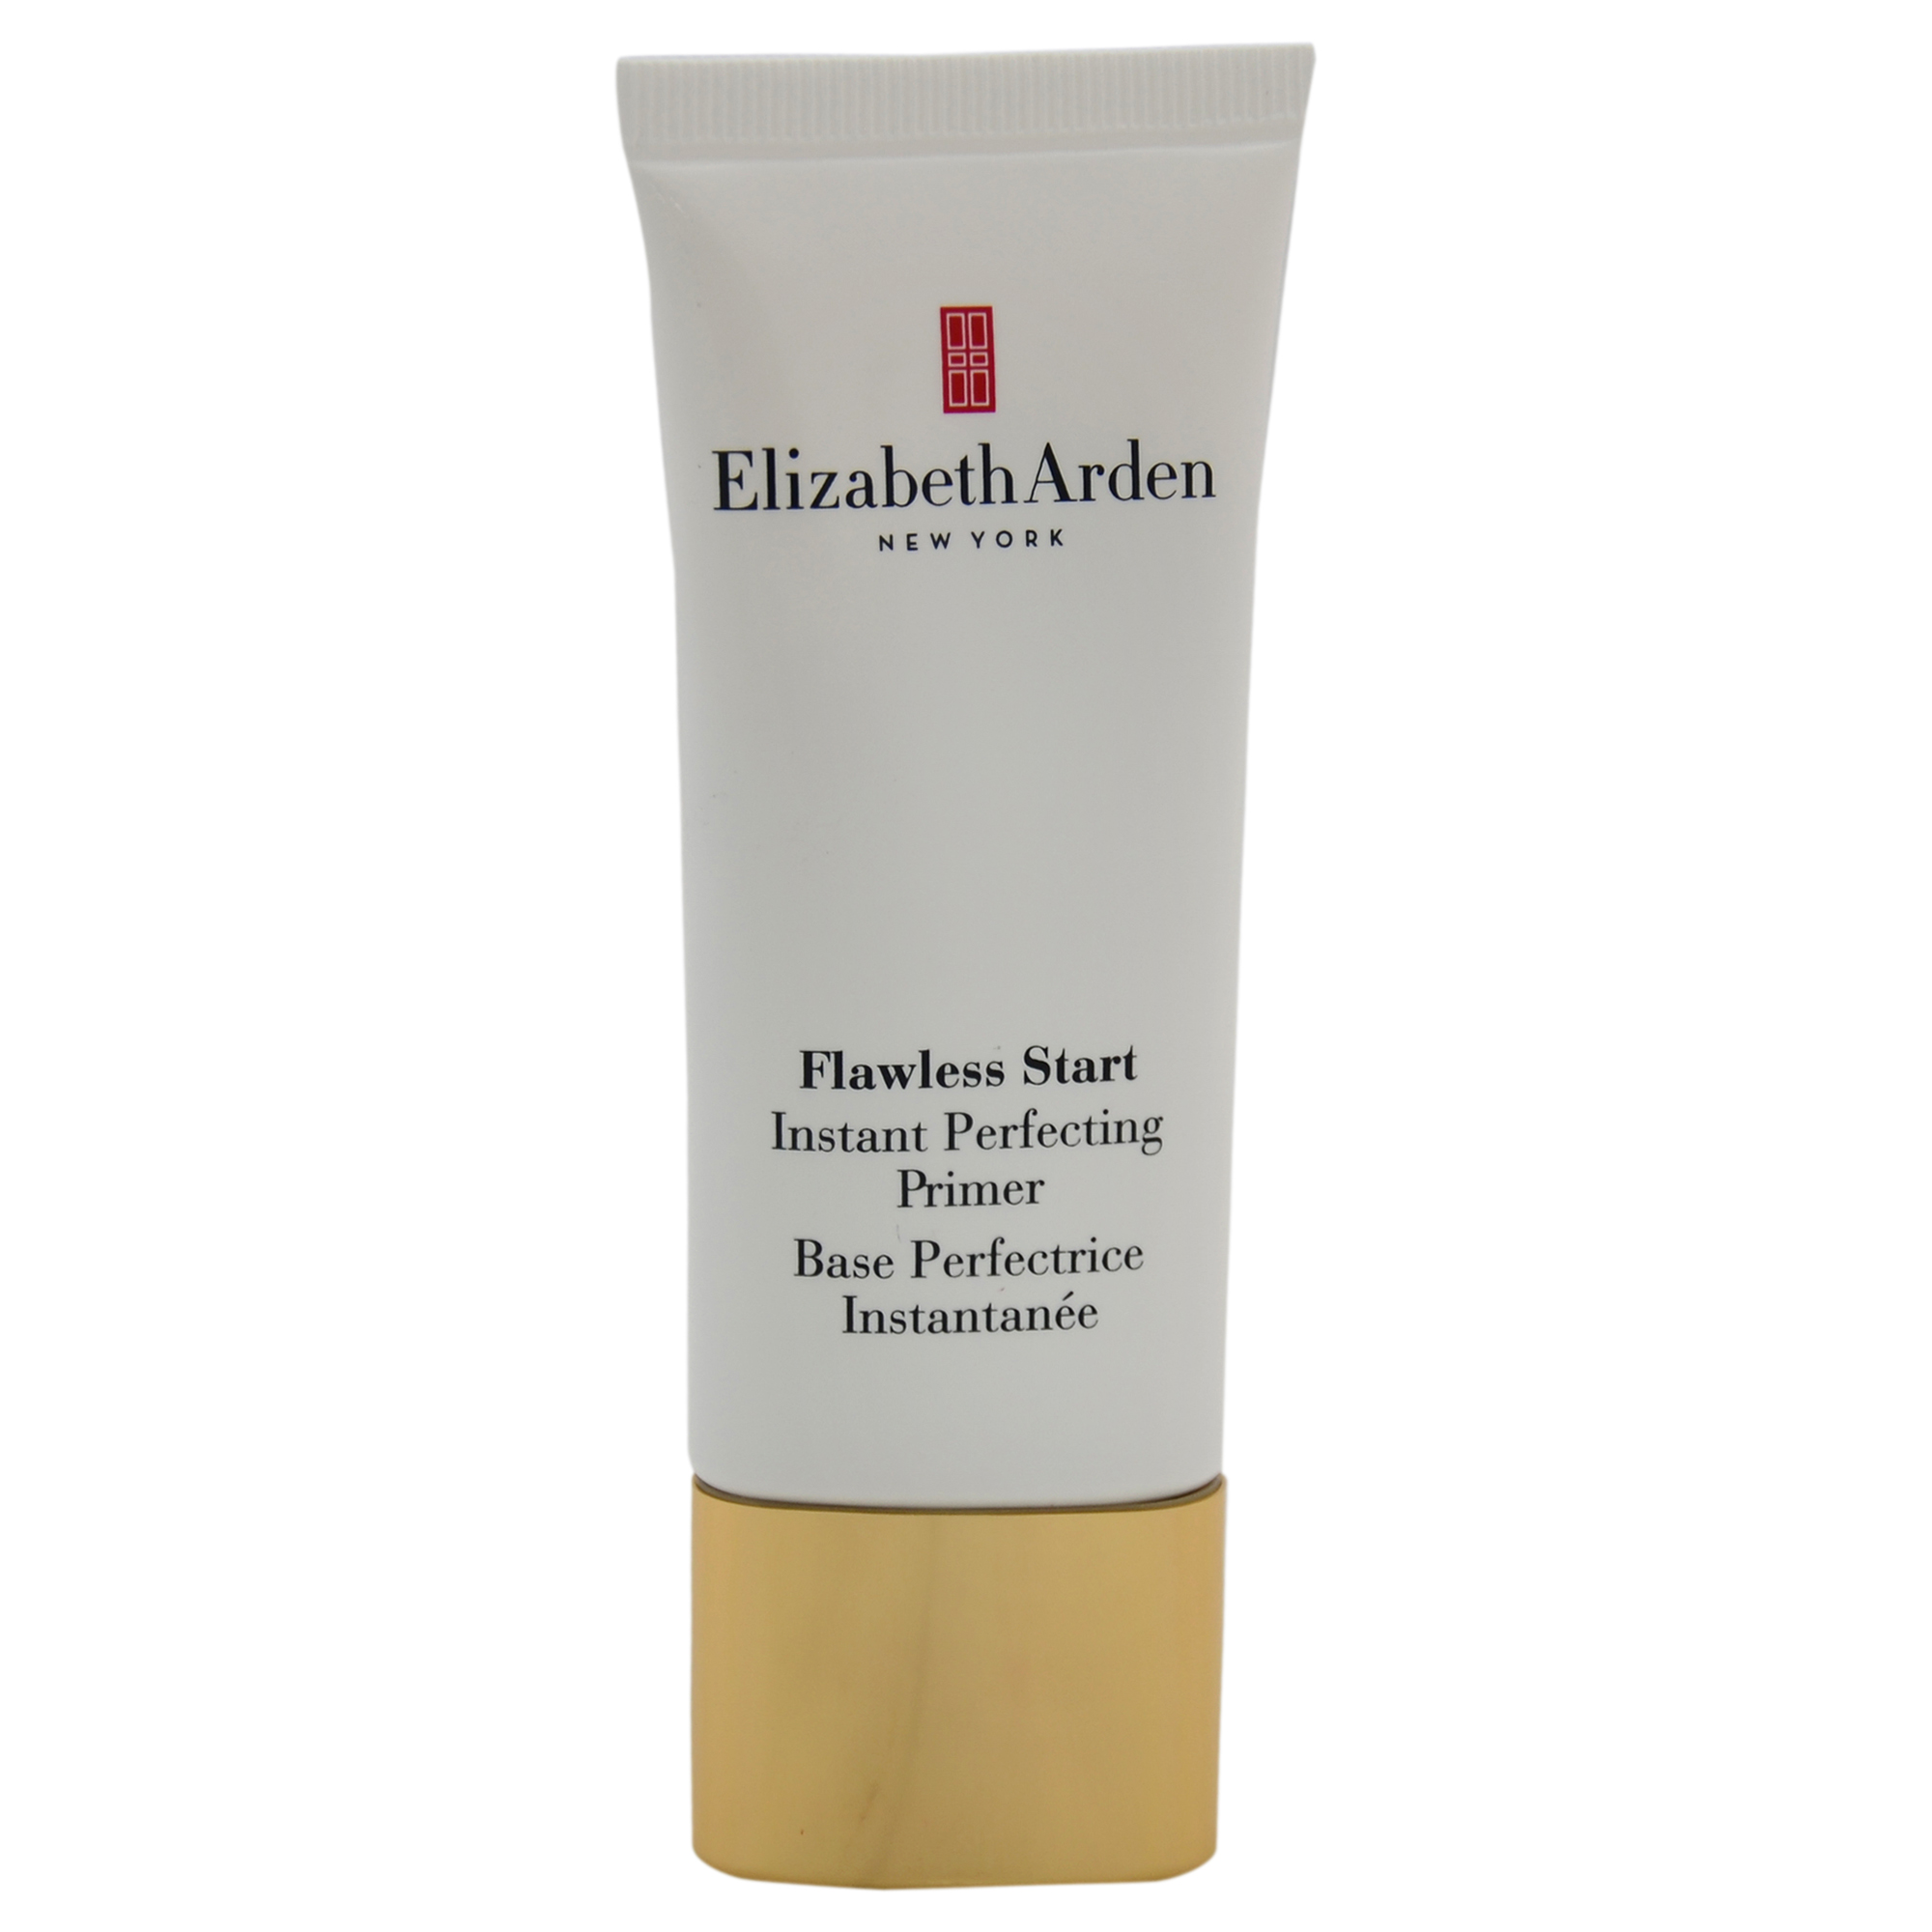 Flawless Start Instant Perfecting Primer by Elizabeth Arden for Women - 1 oz Primer - image 2 of 2